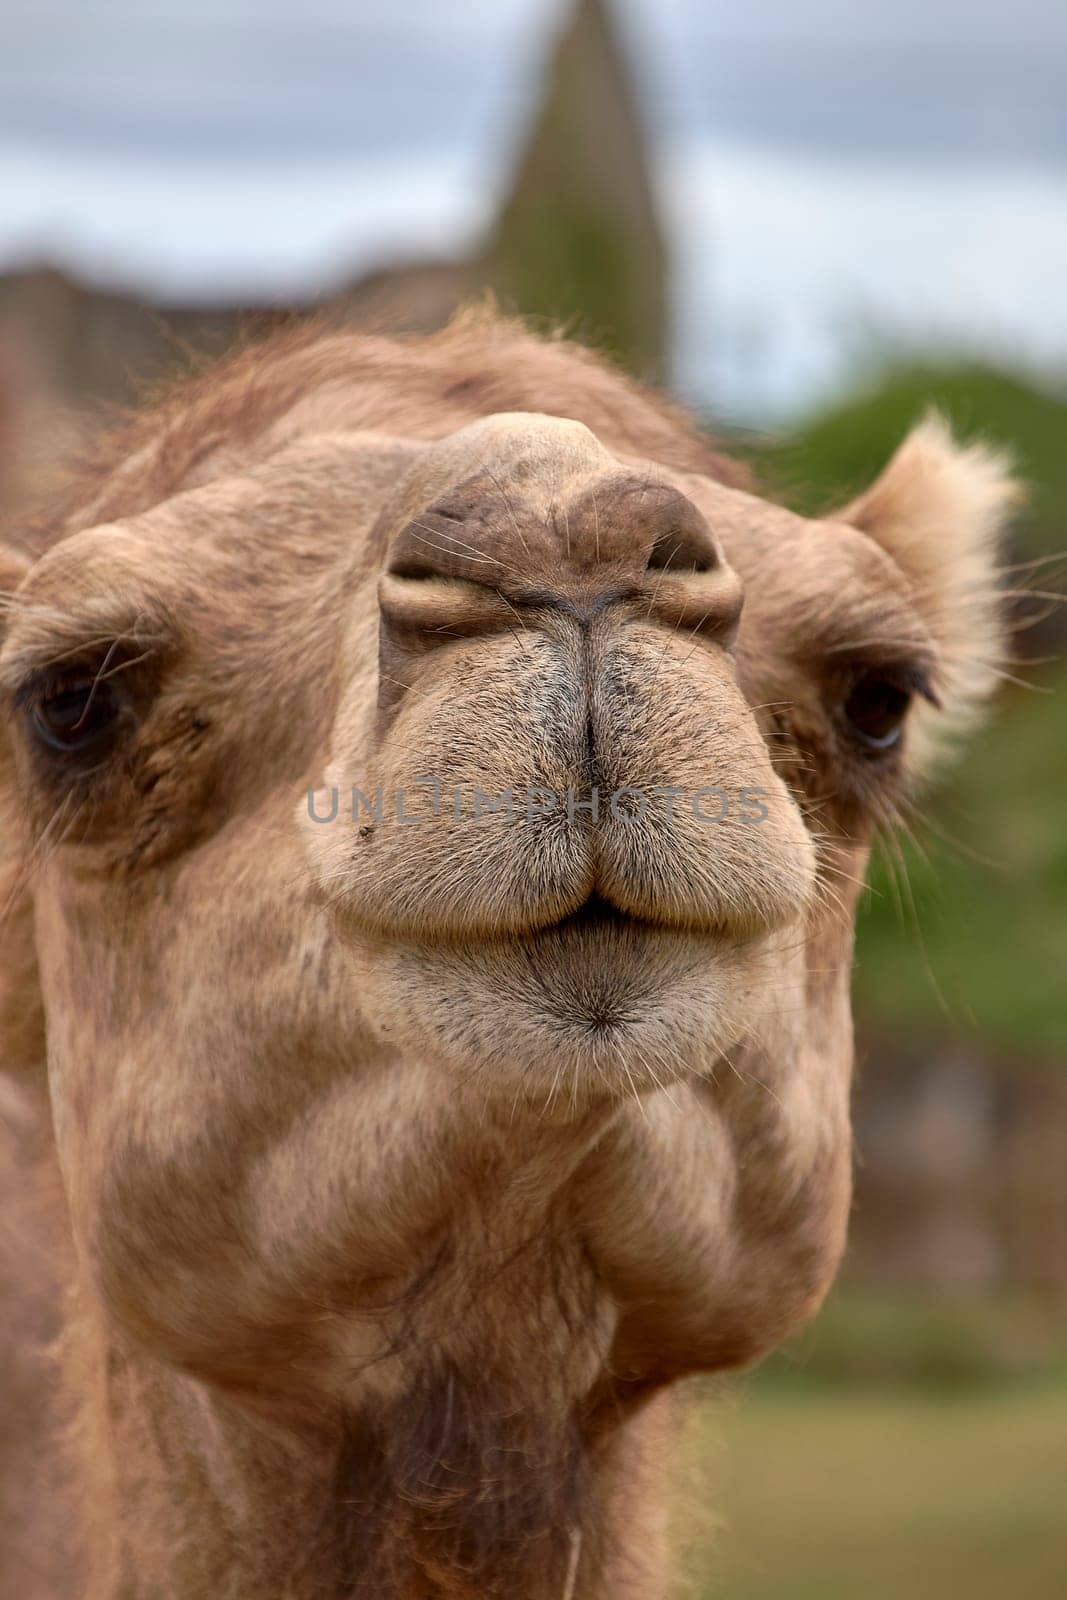 Detail of the head of a dromedary. Cloudy sky, texture, hairs, eye, nose, nose, mouth, smile